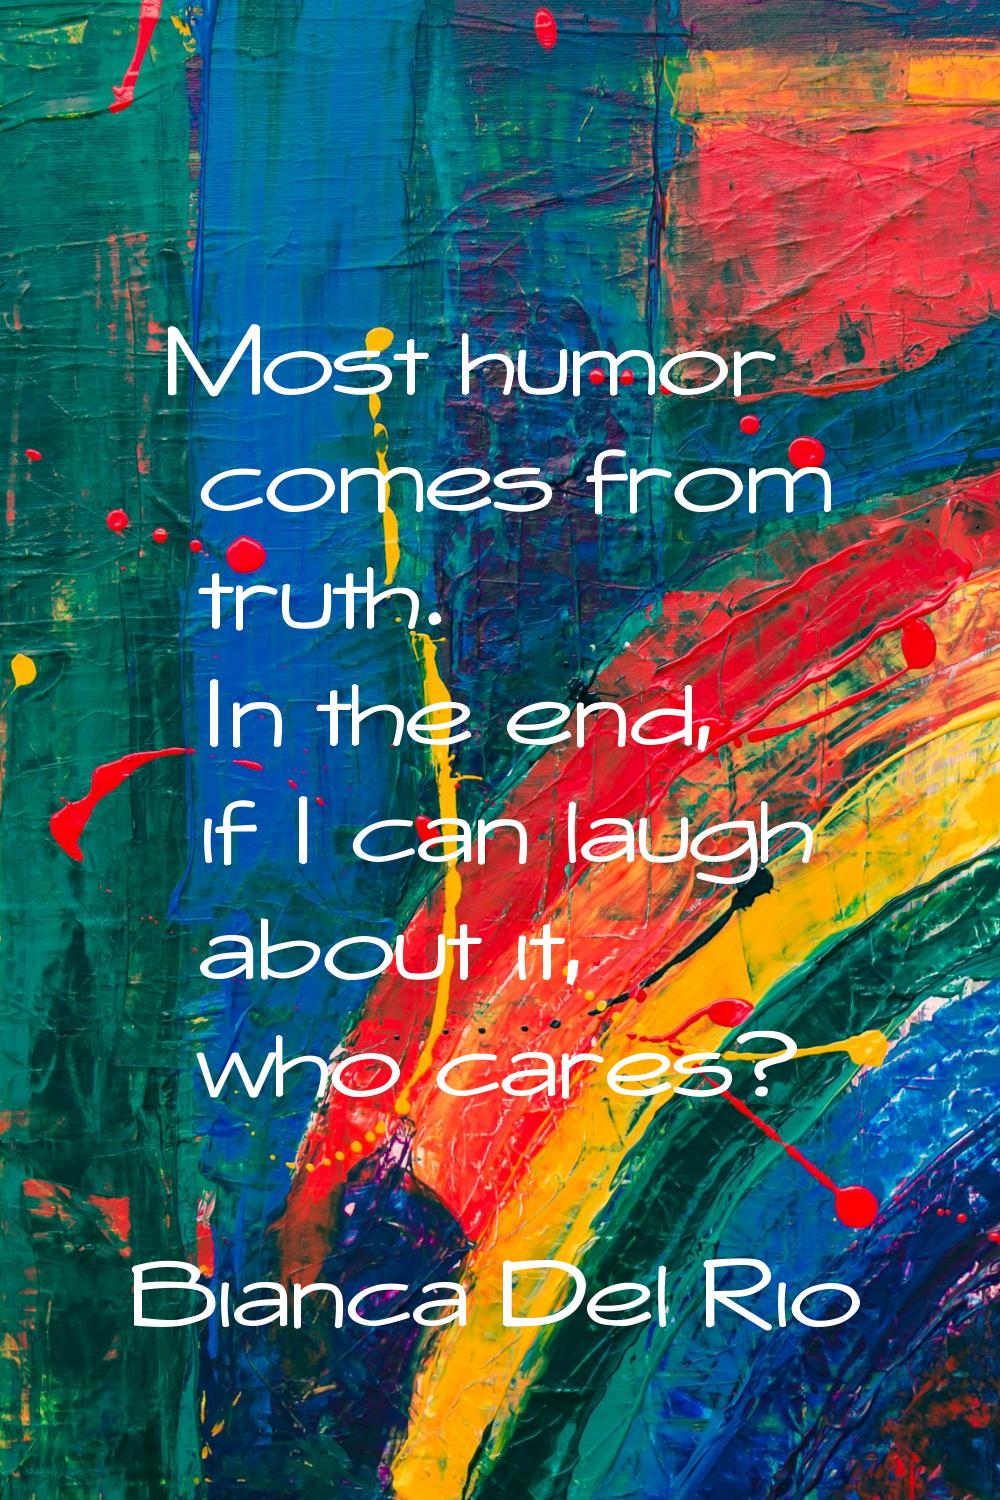 Most humor comes from truth. In the end, if I can laugh about it, who cares?